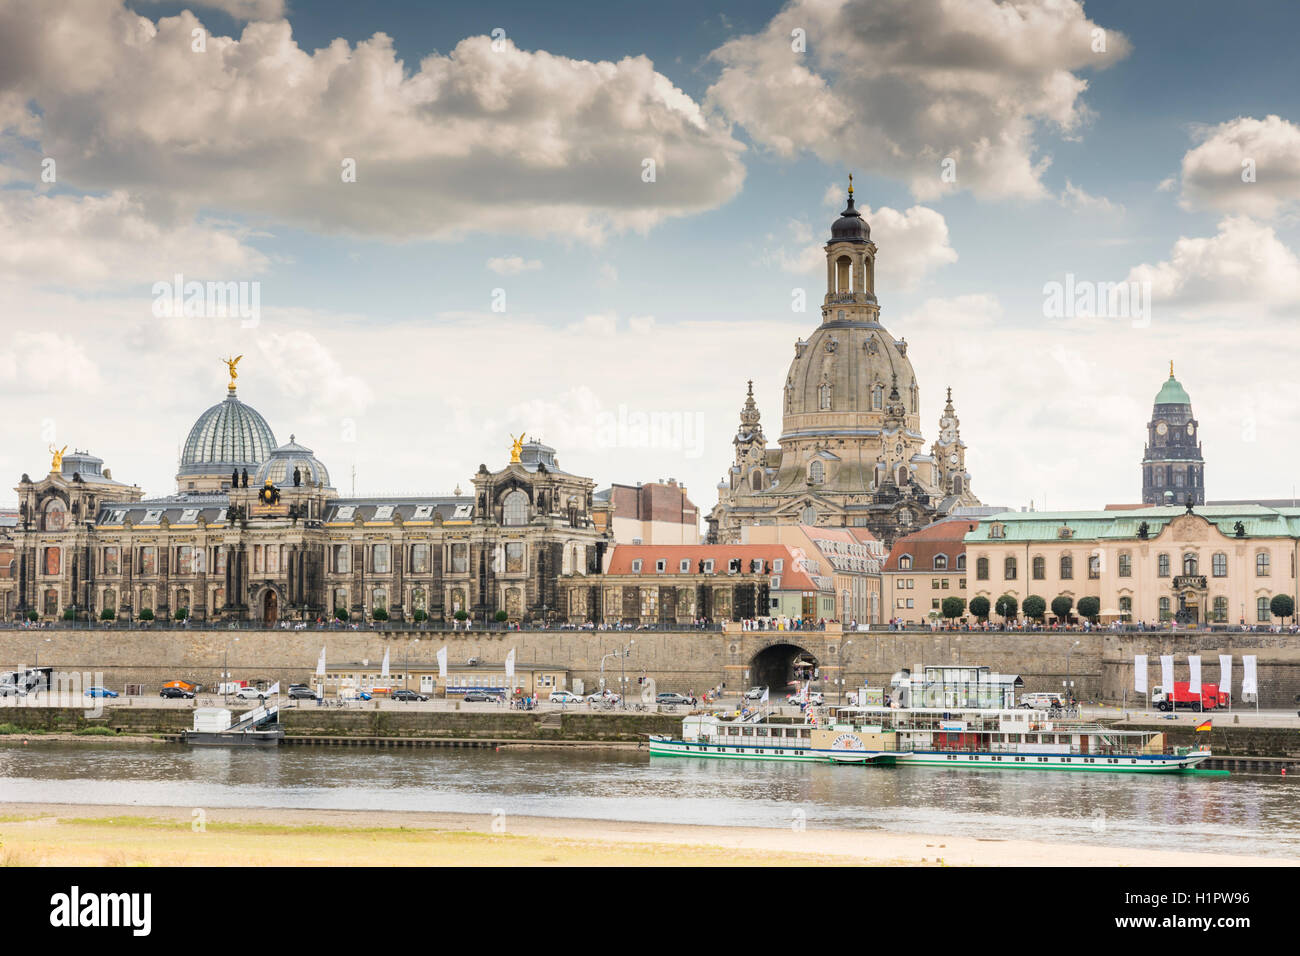 DRESDEN, GERMANY - AUGUST 22: Tourists at the promenade of the river Elbe in Dresden, Germany on August 22, 2016. Stock Photo